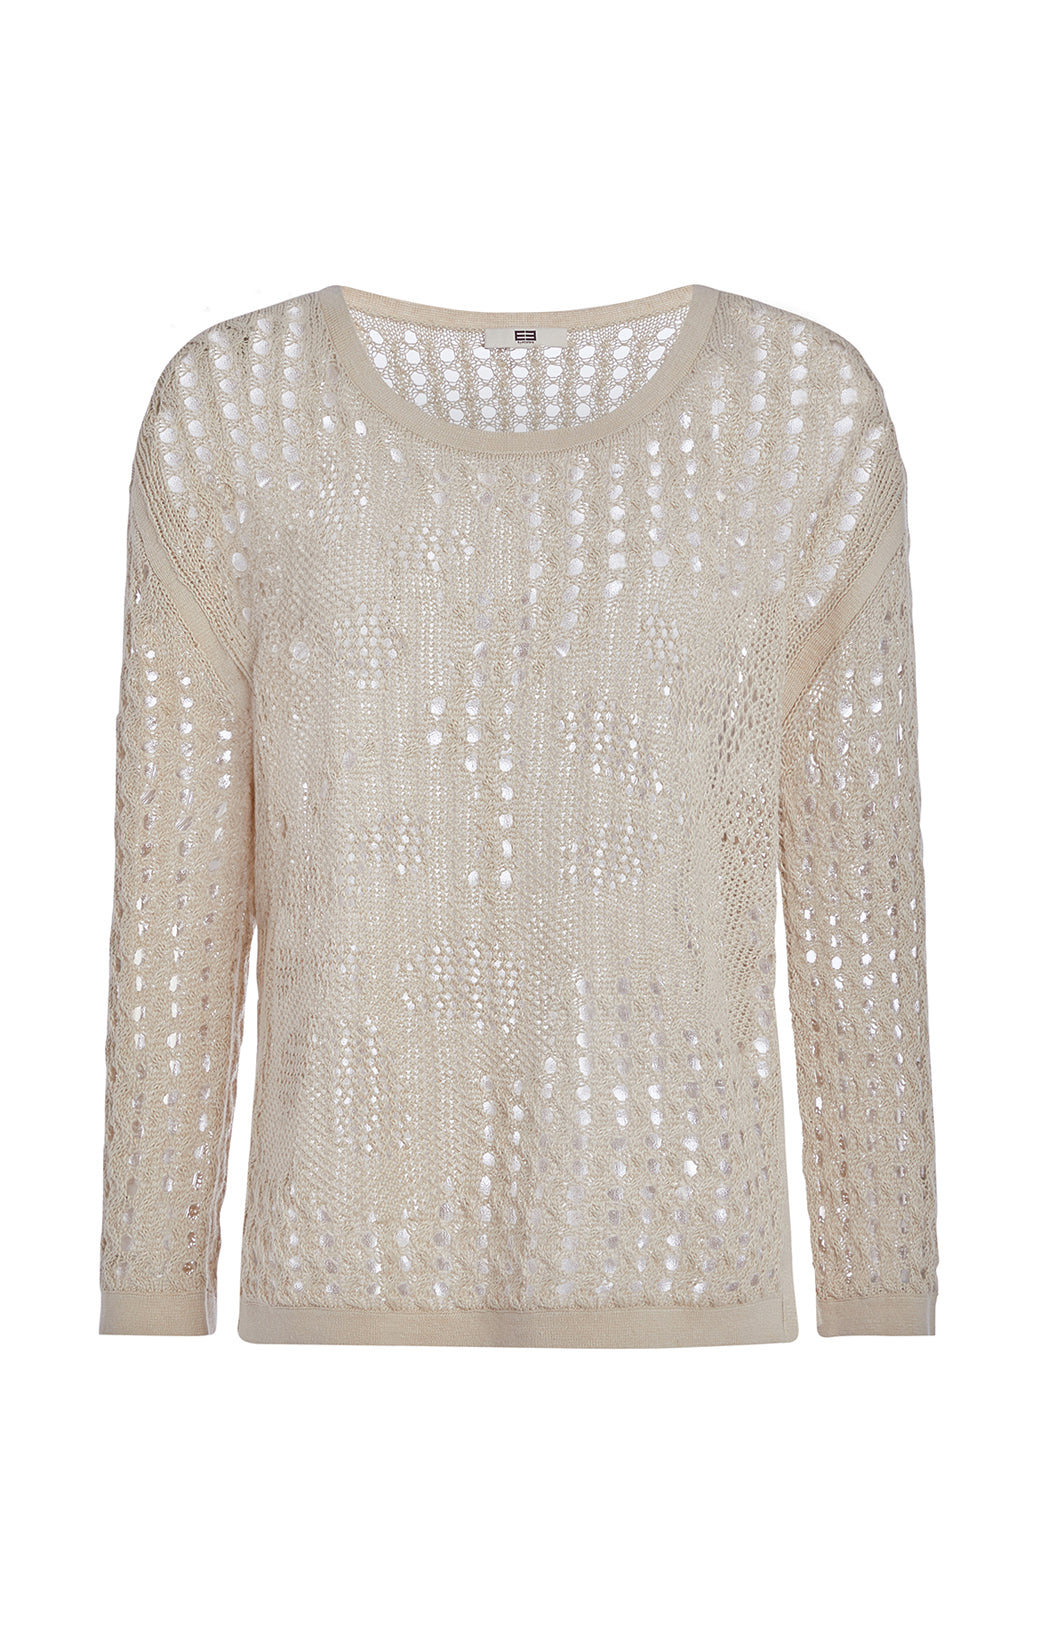 Riviera - Crochet-Look Textured Pullover - Product Image